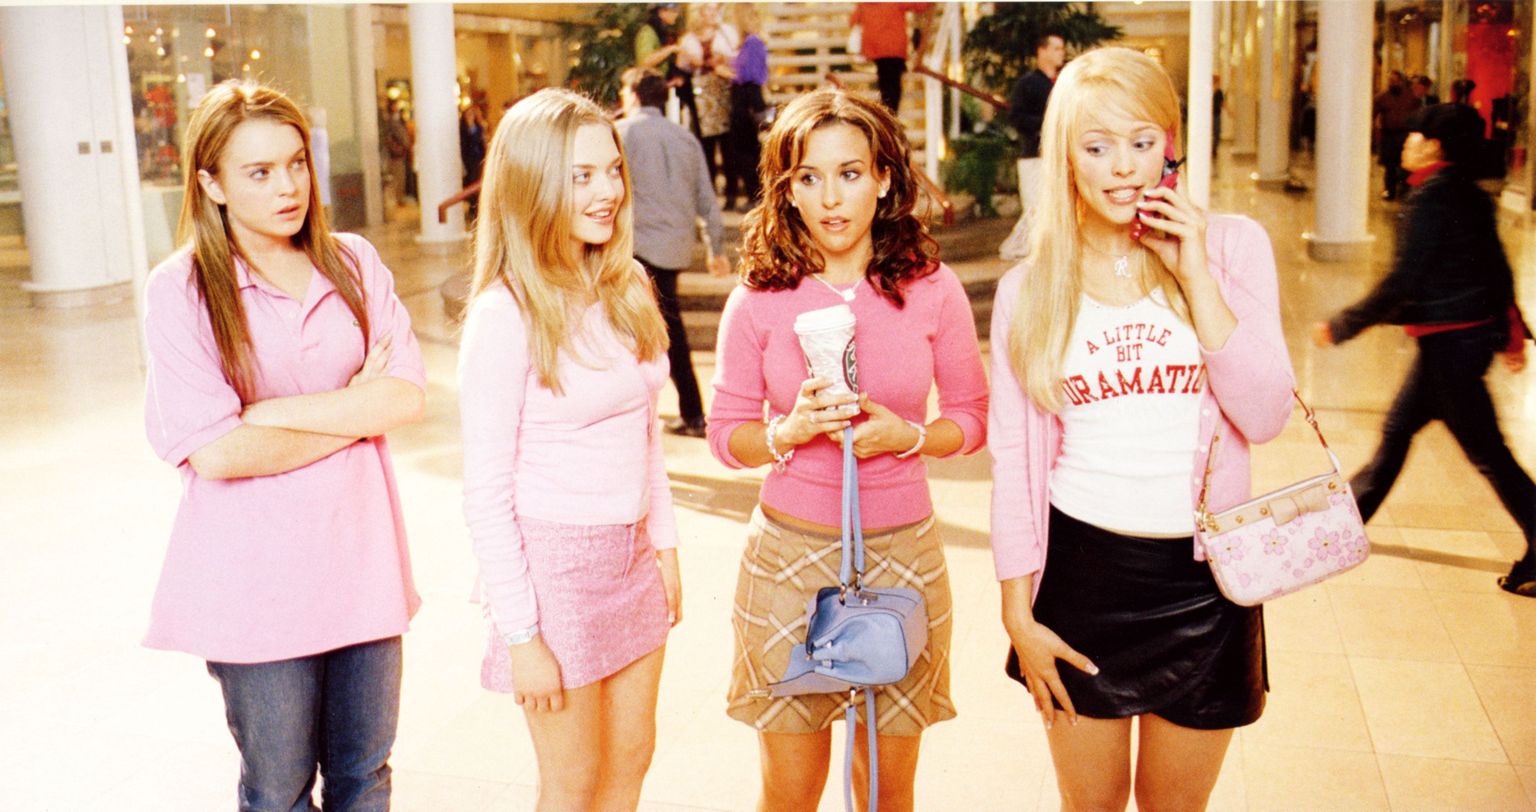 MEAN GIRLS LINDSAY LOHAN, AMANDA SEYFIELD, LACEY CHABERT, RACHEL MCADAMS PICTURE FROM THE RONALD GRANT ARCHIVE FILM RELEASE BY PARAMOUNT PICTURES